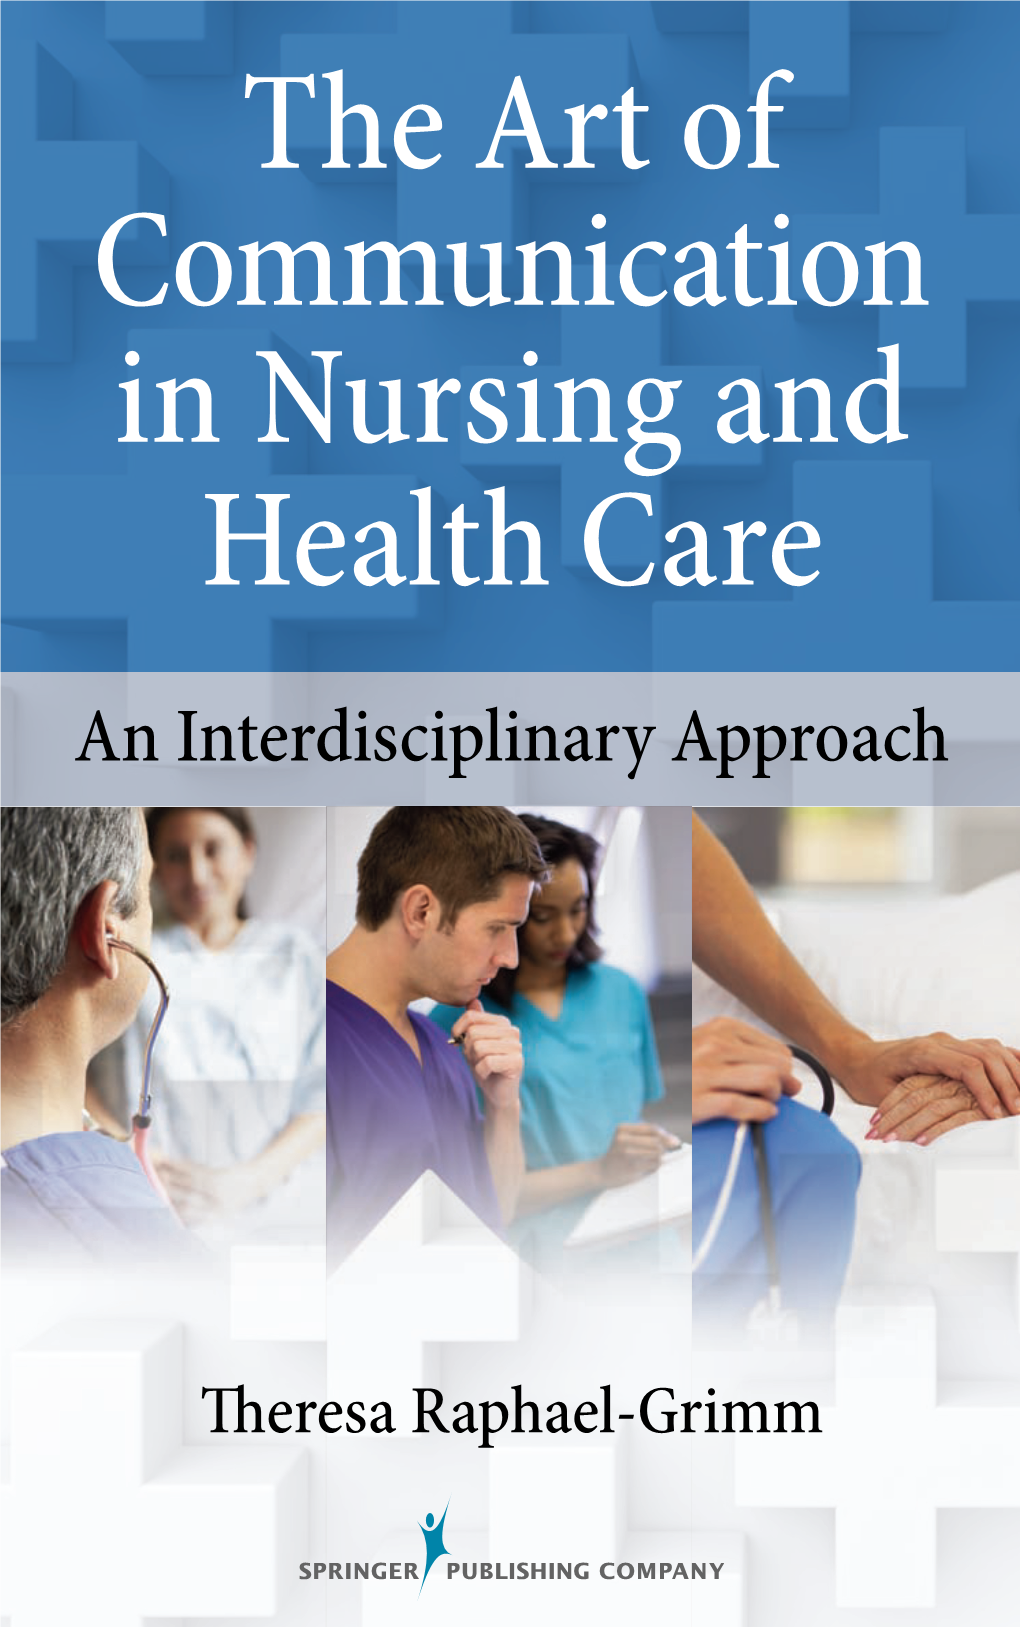 The Art of Communication in Nursing and Health Care